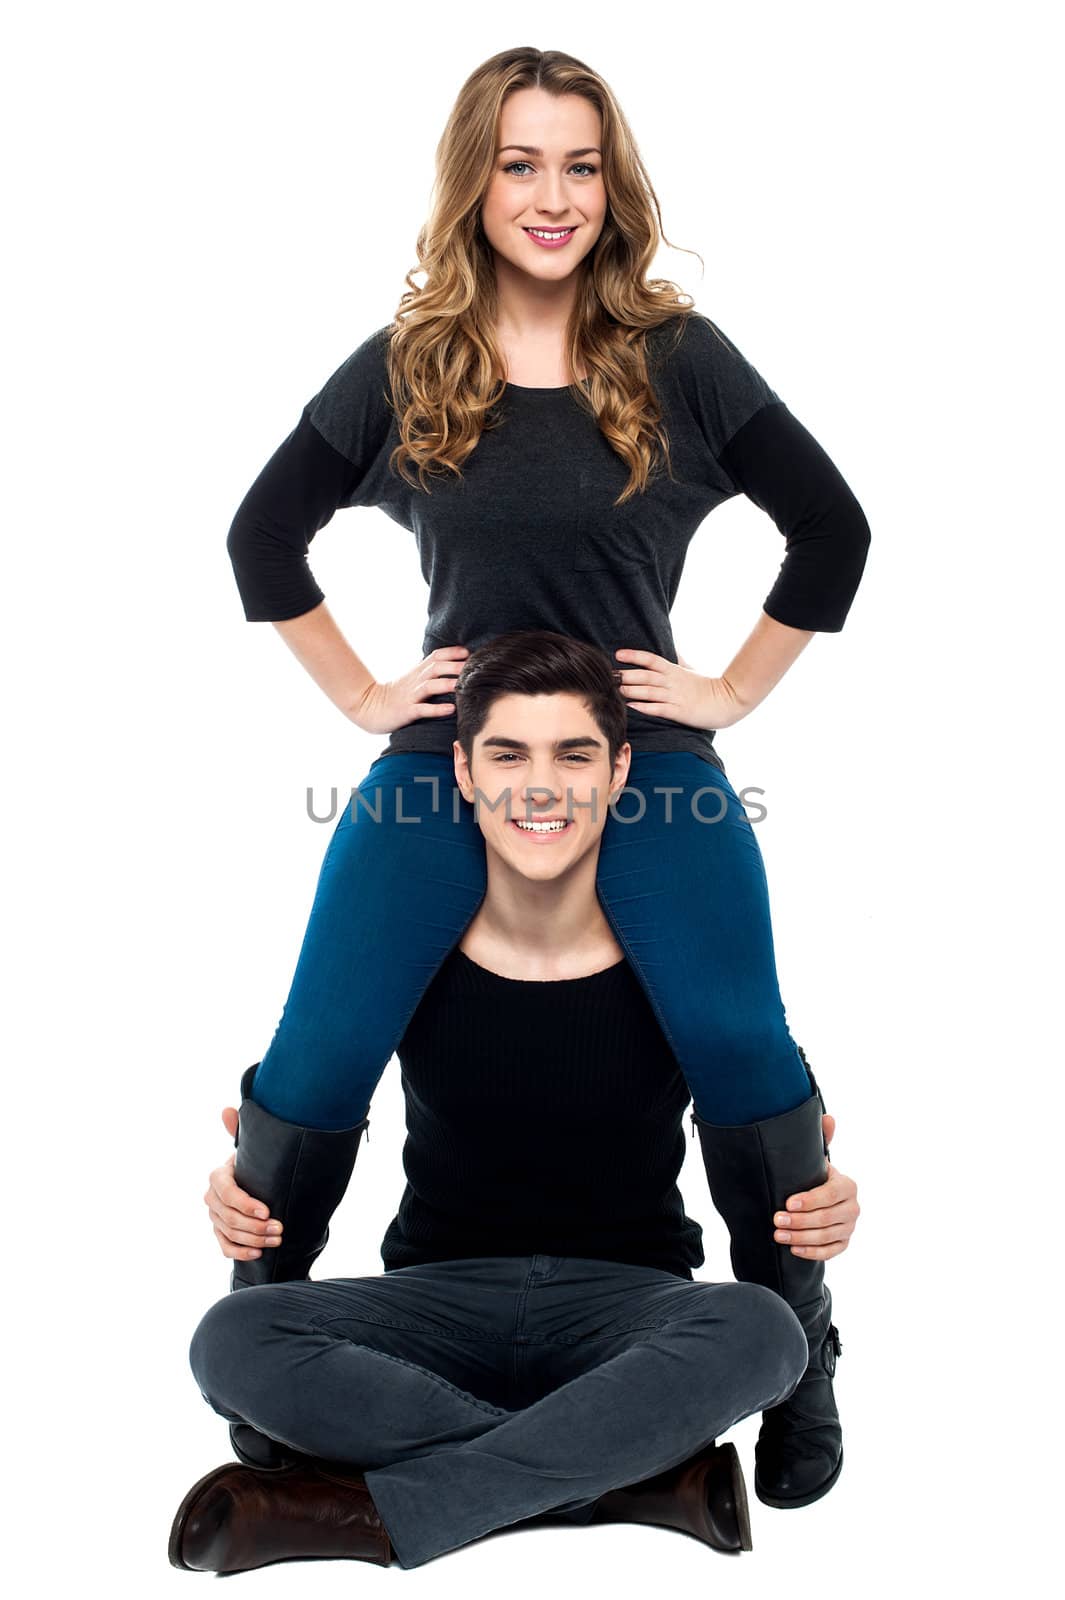 Cool young boy sitting on the floor with girlfriend on his shoulders.